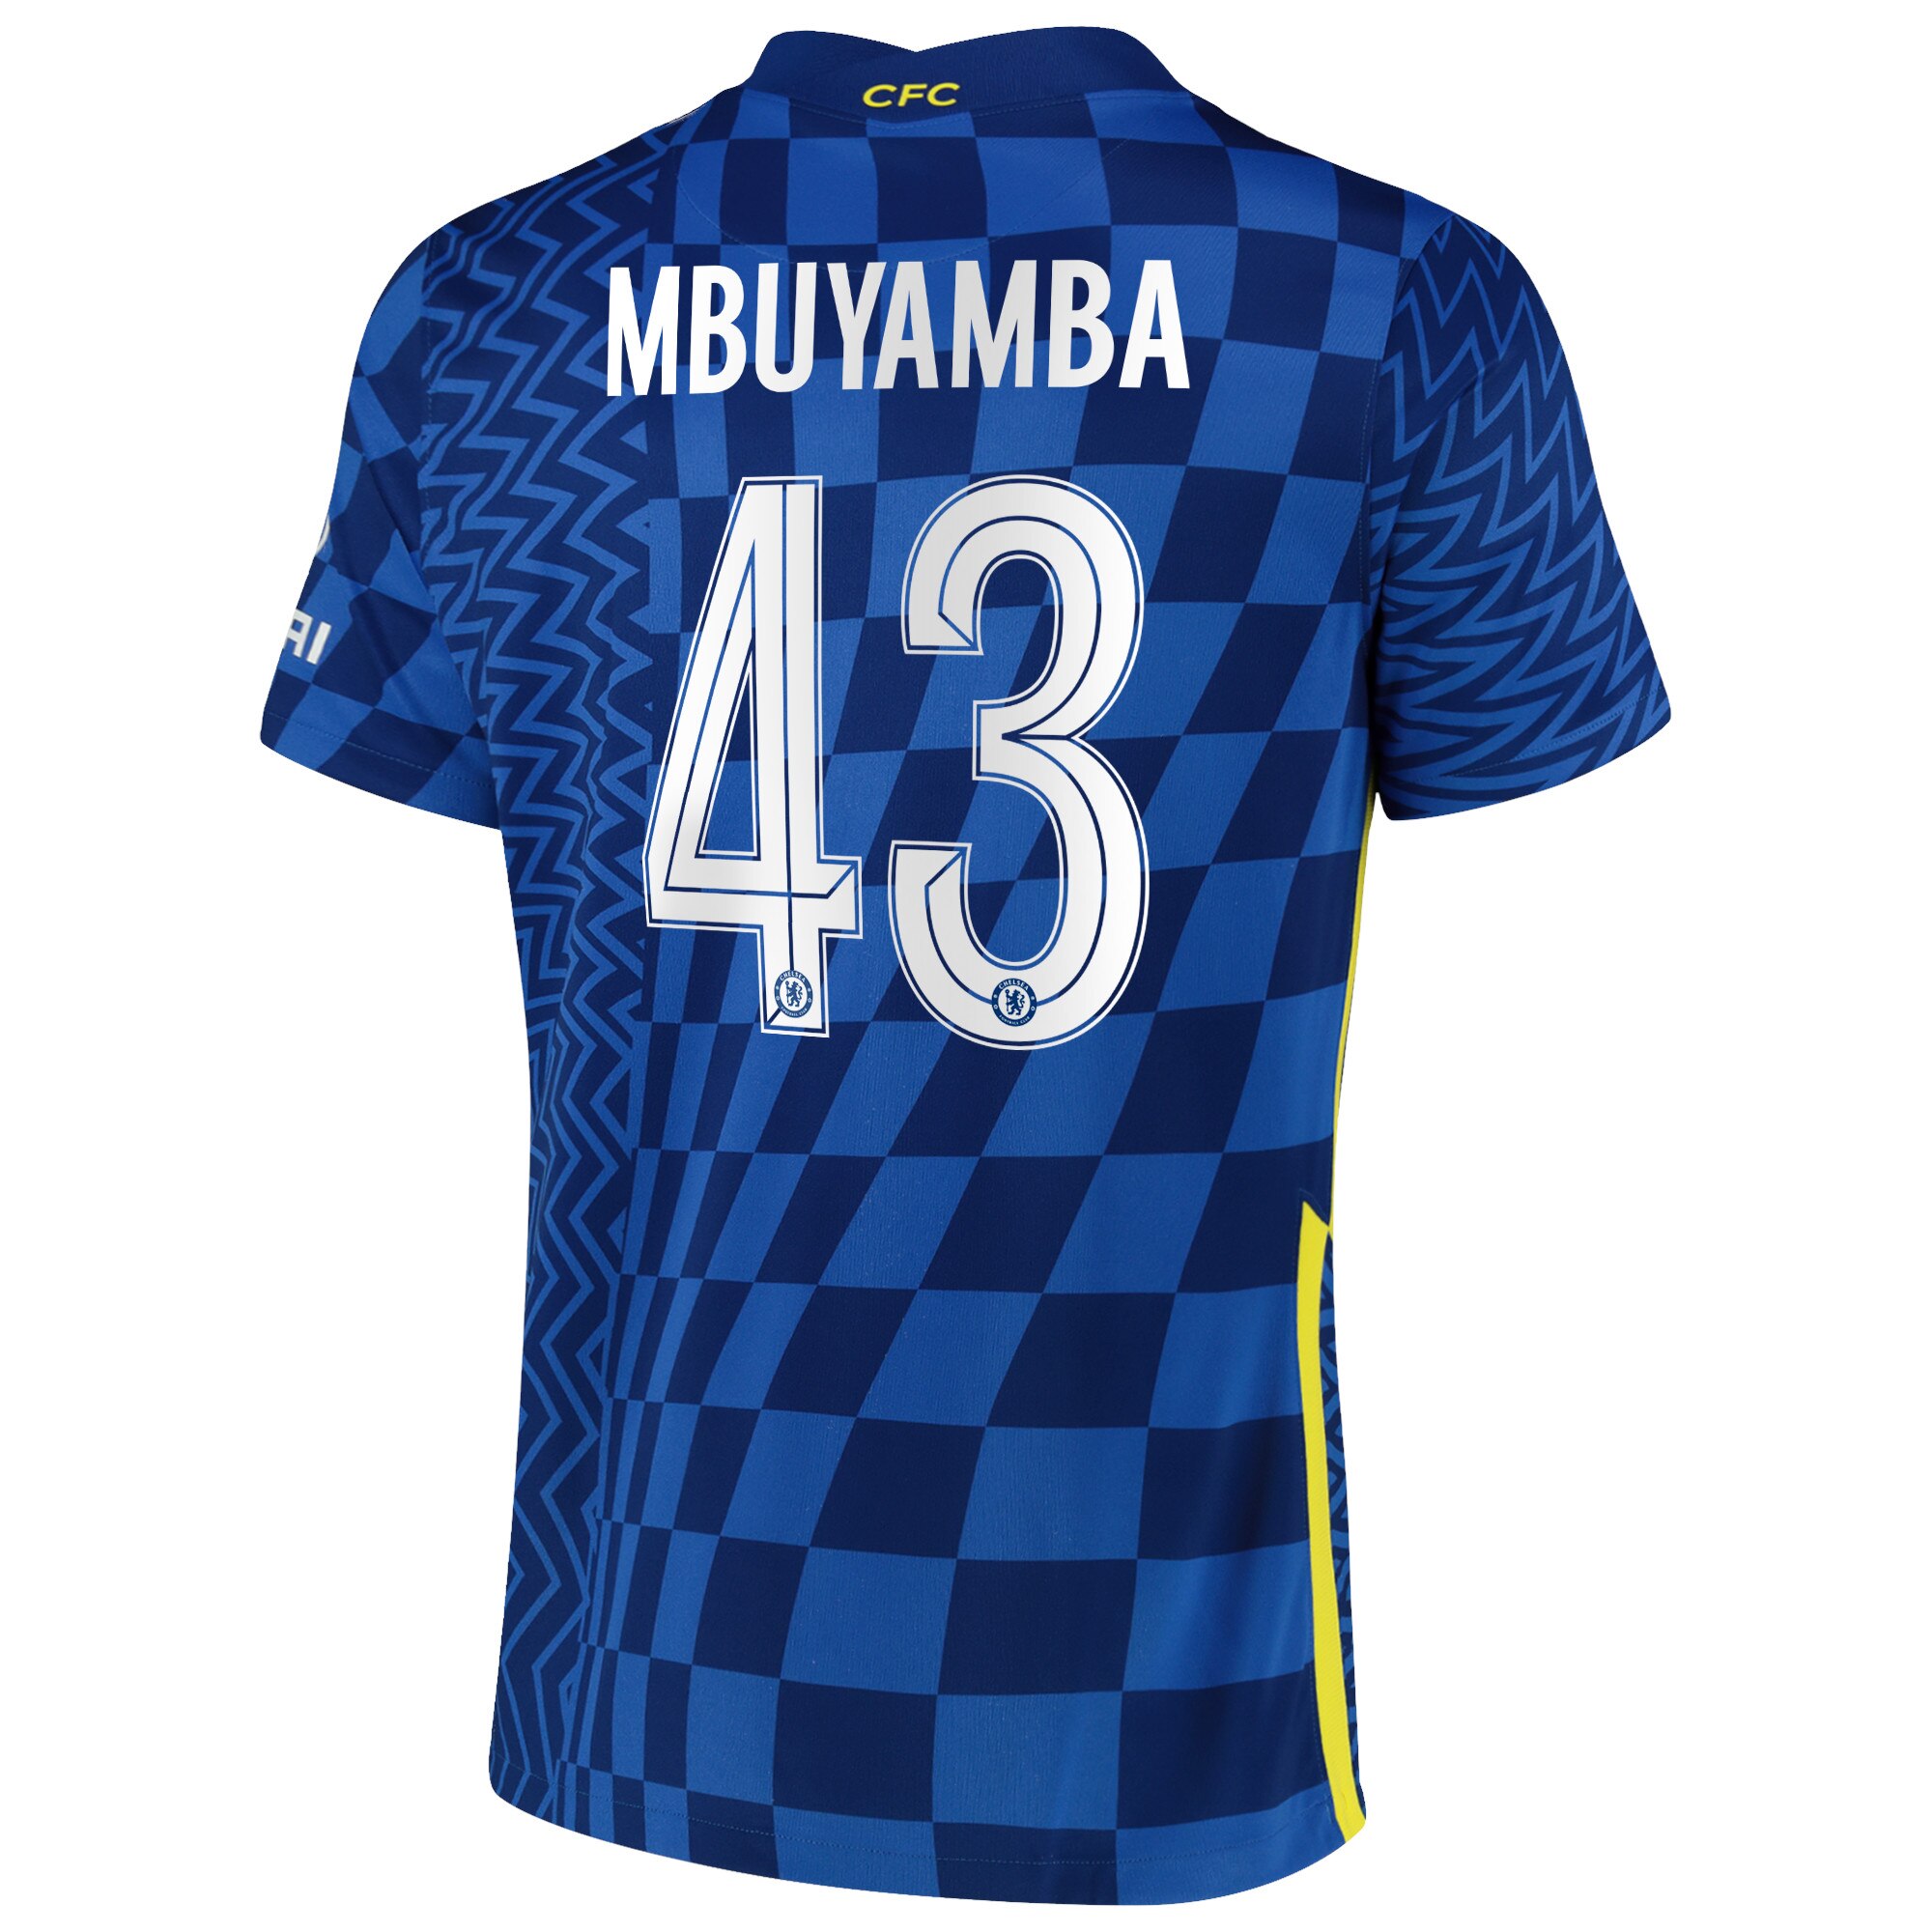 Chelsea Cup Home Stadium Shirt 2021-22 with Mbuyamba 43 printing